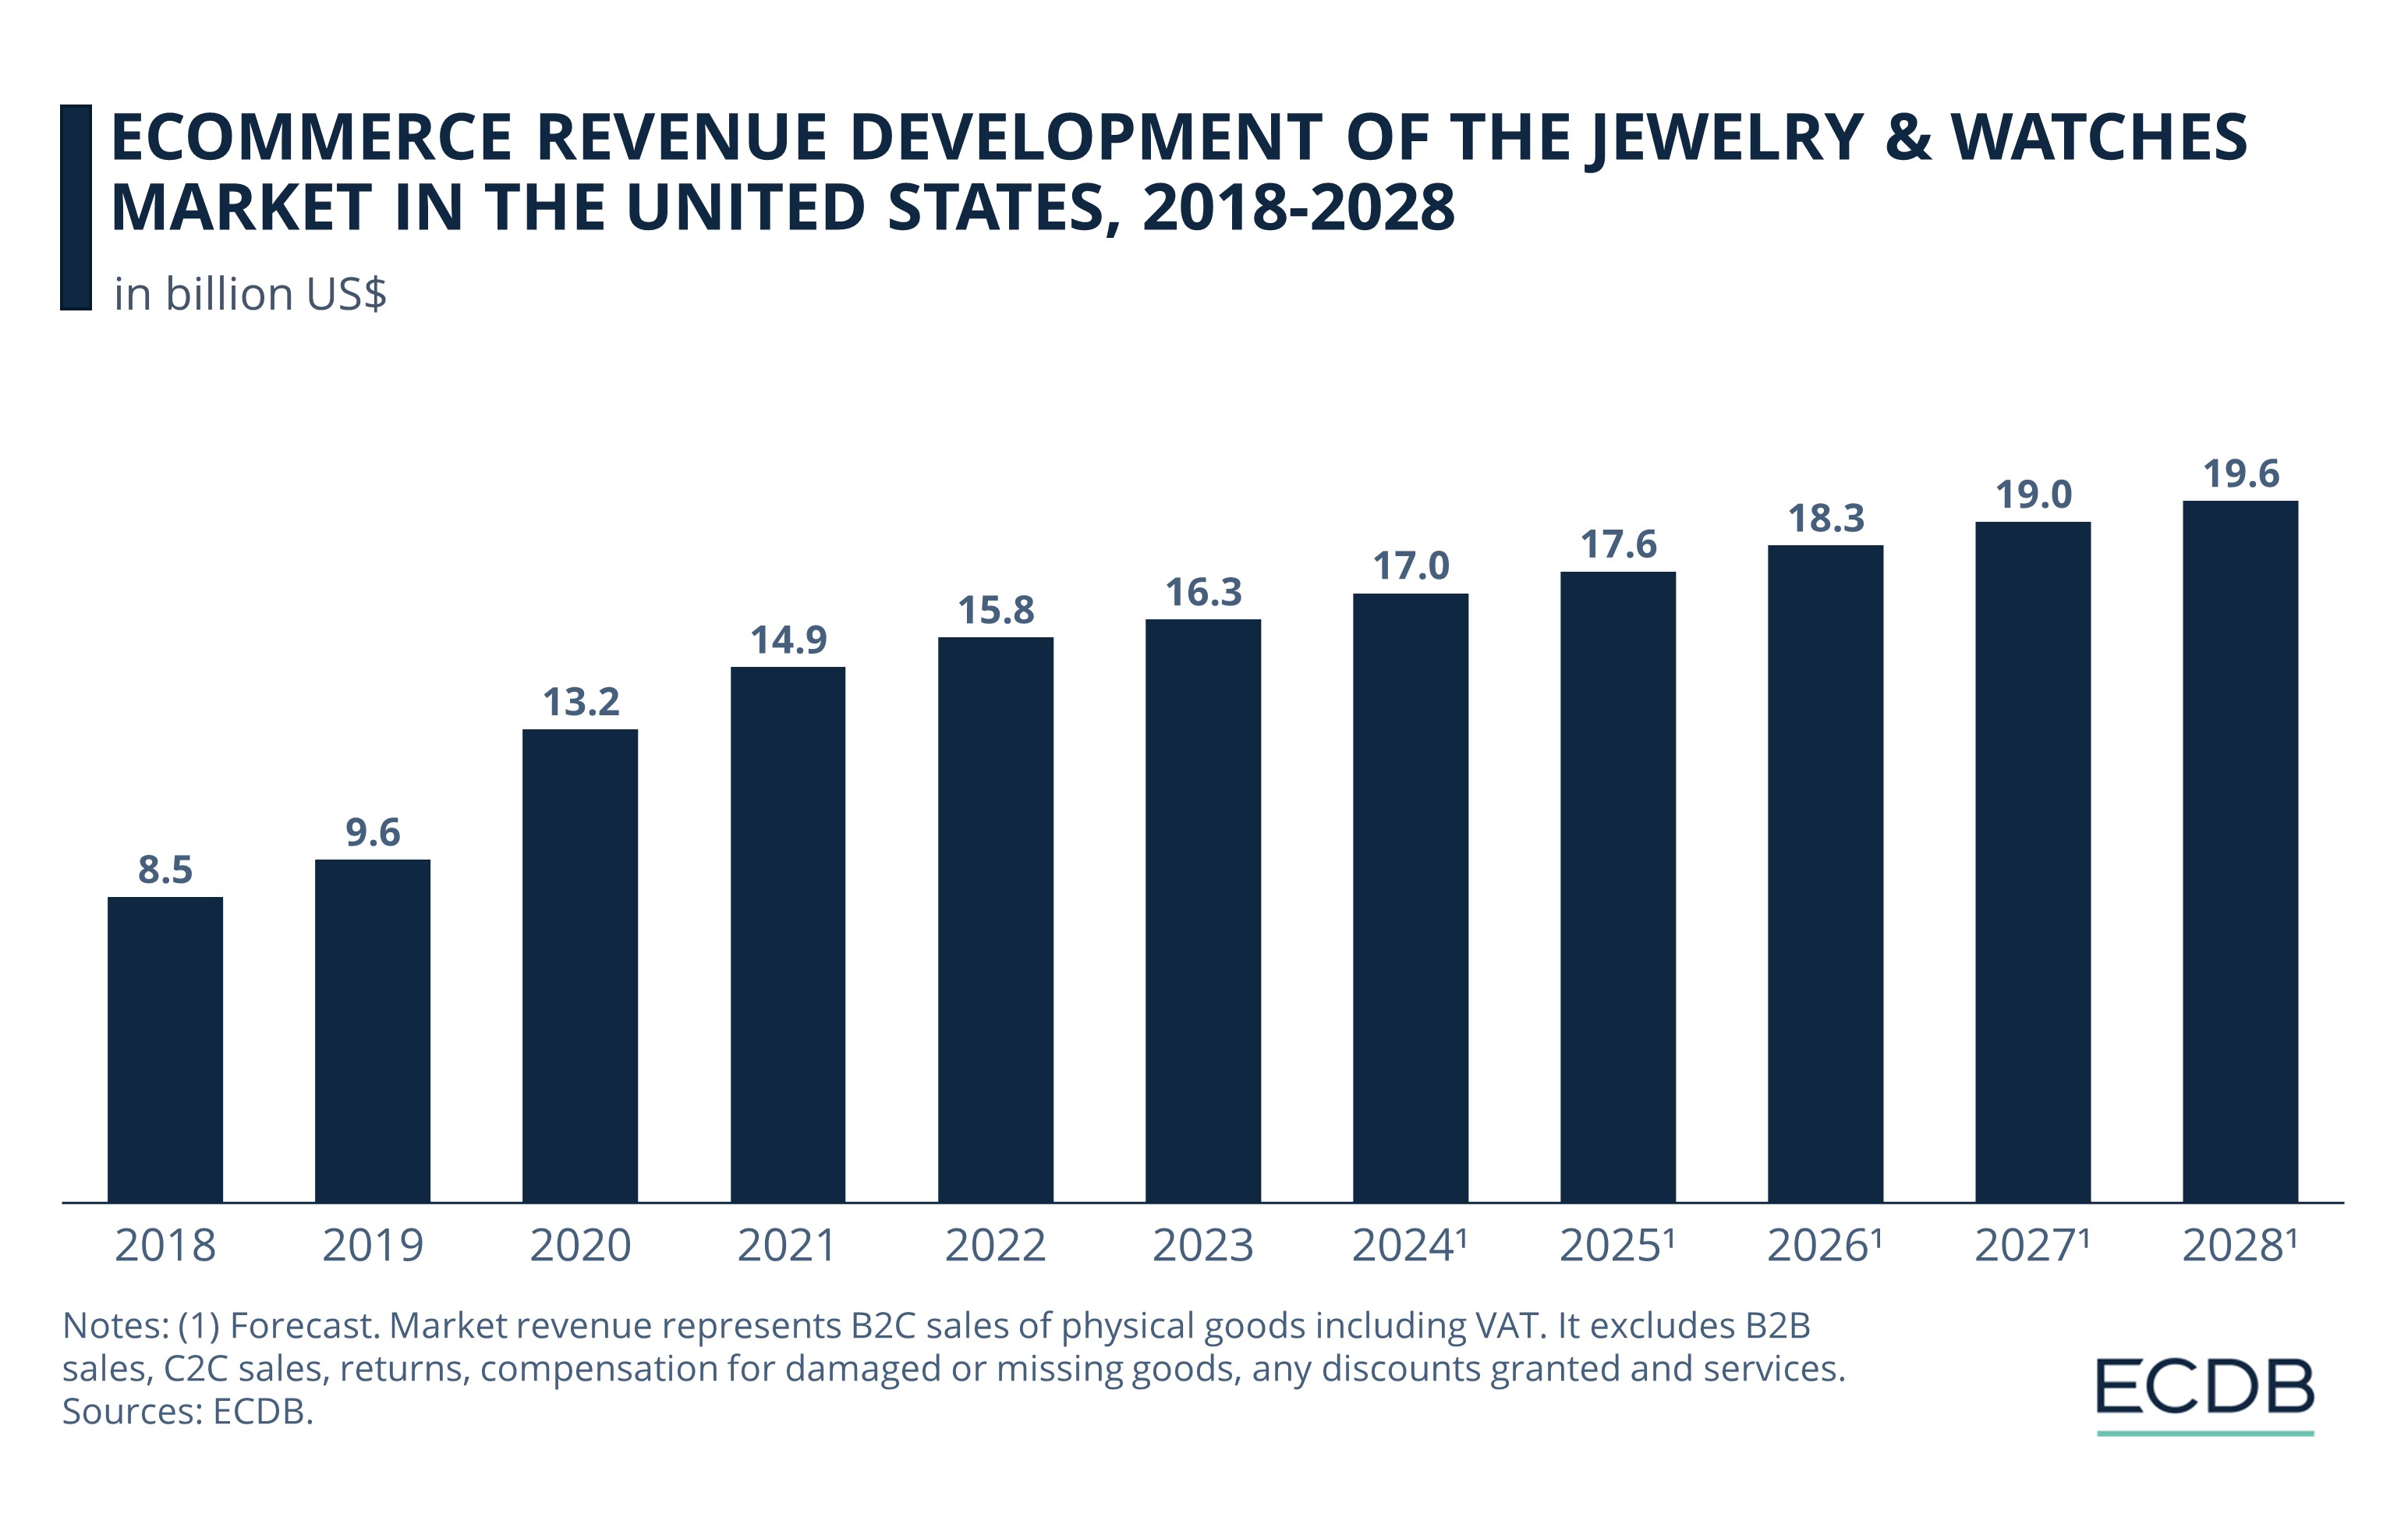 Ecommerce Revenue - Jewelry & Watches Market in the Unıted States, 2018-2028